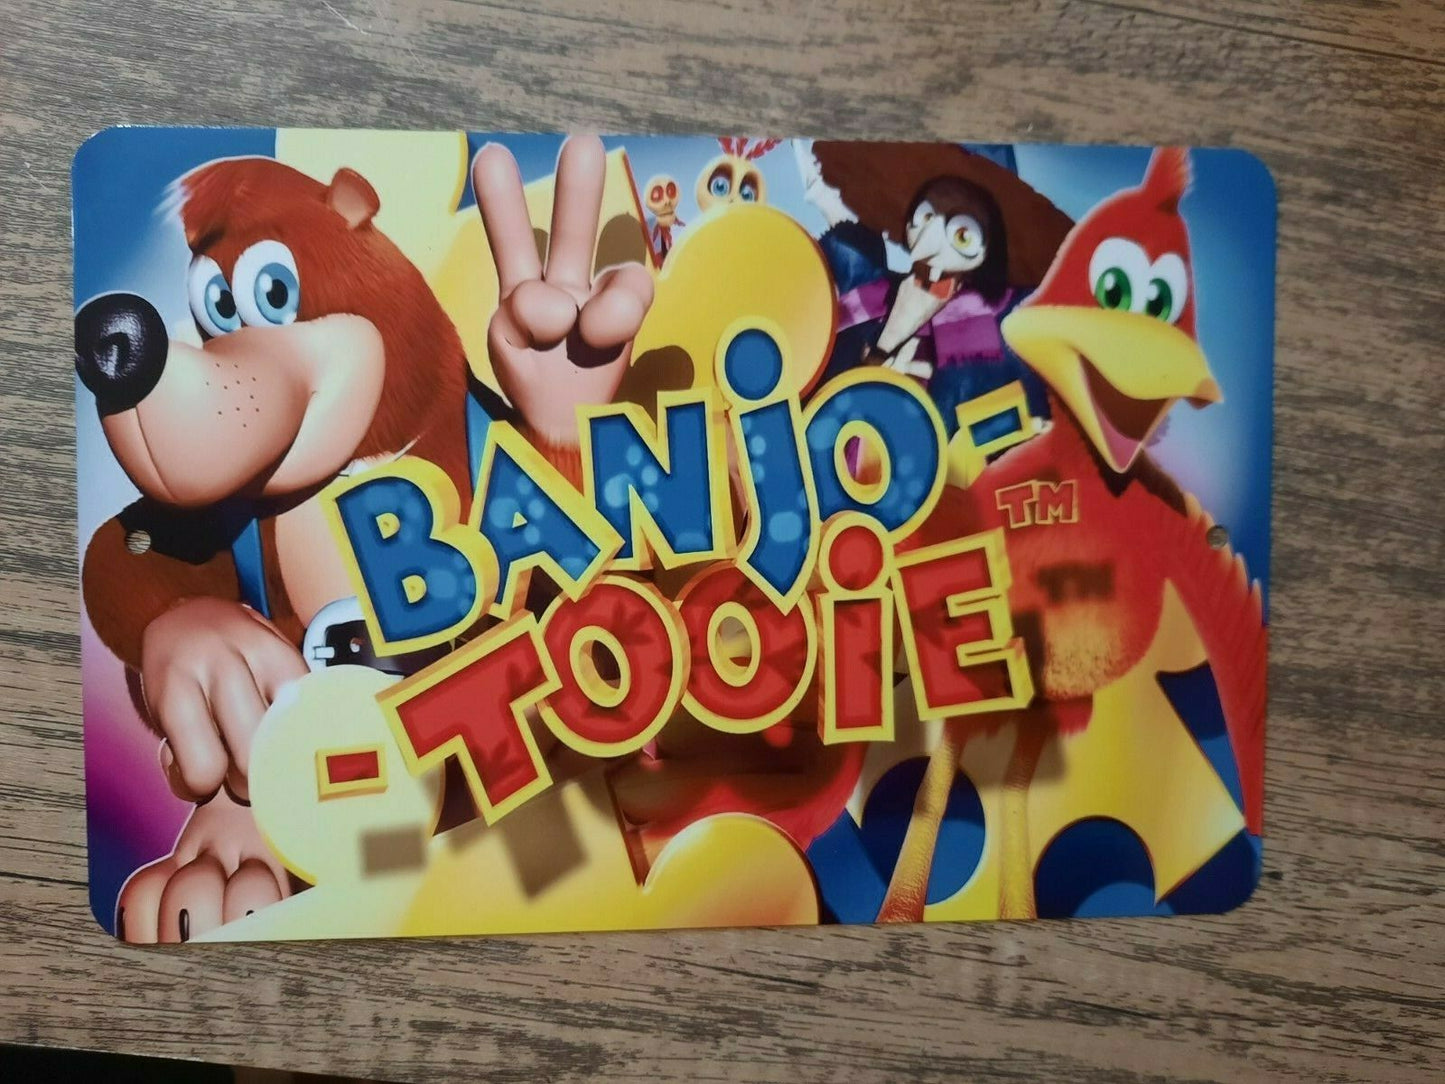 Banjo Tooie 8x12 Metal Wall Sign Video Game Arcade